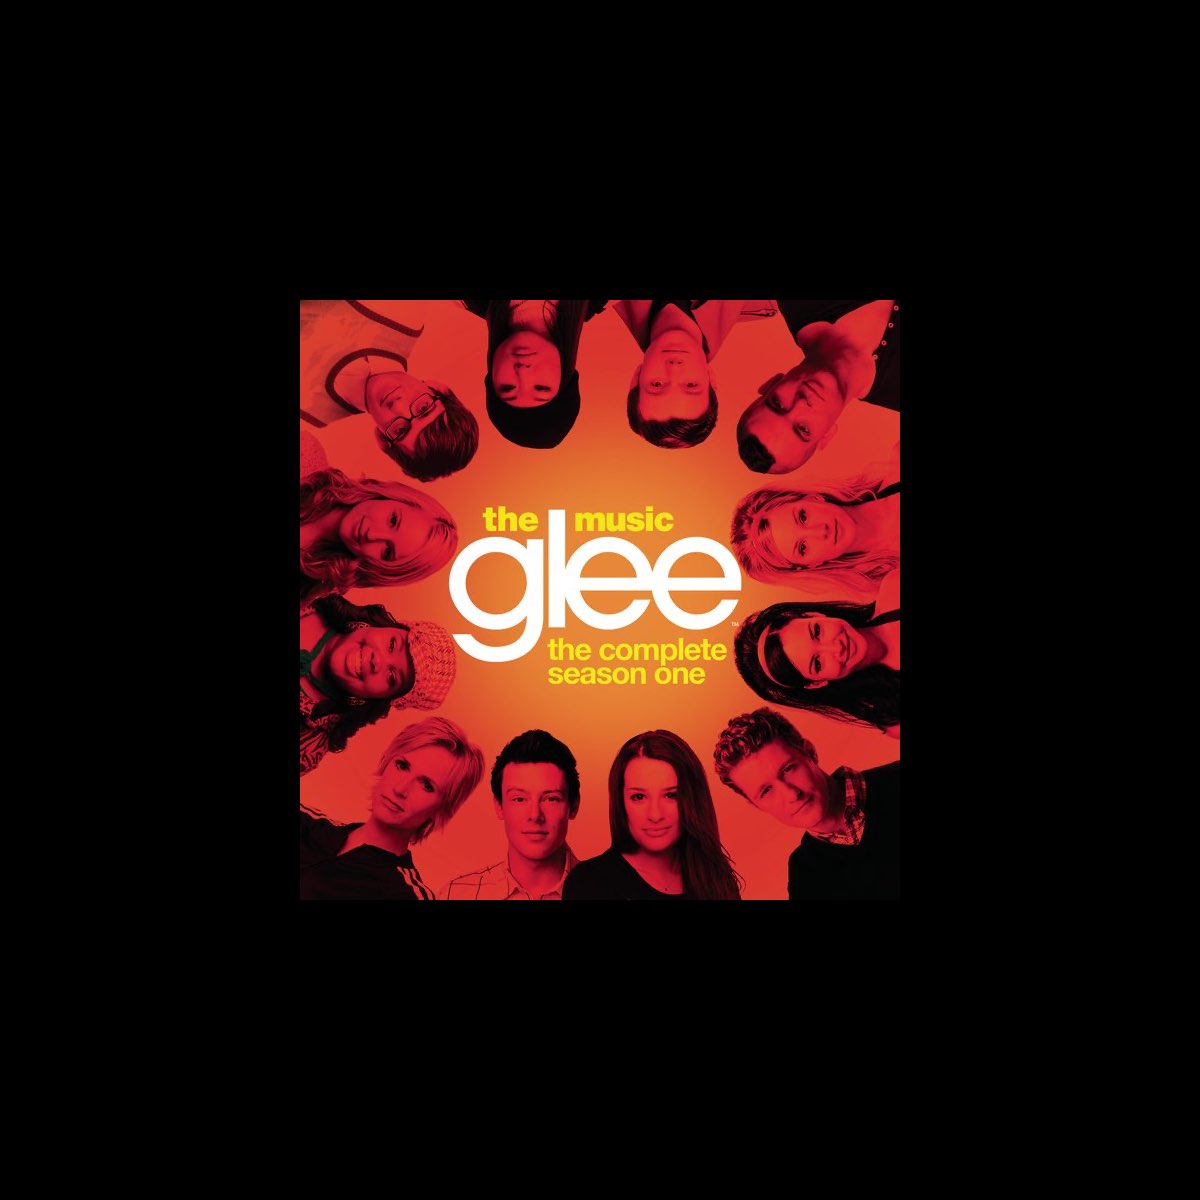 Glee: The Music, The Complete Season One by Glee Cast on Apple Music